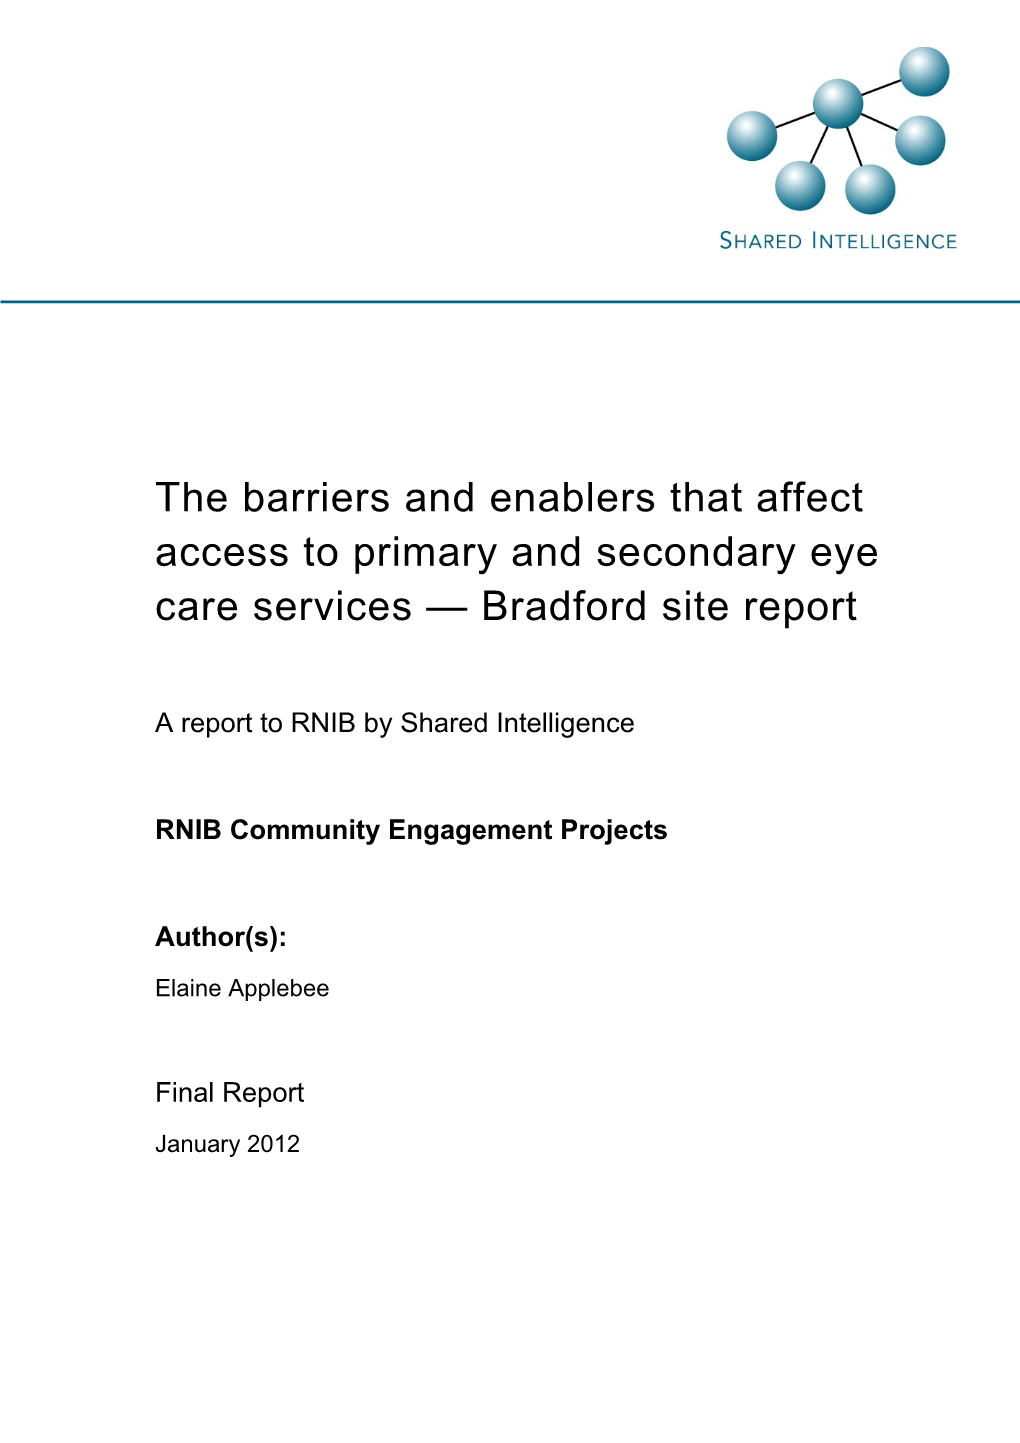 Barriers and Enablers in Accessing Eye Care Services in Bradford